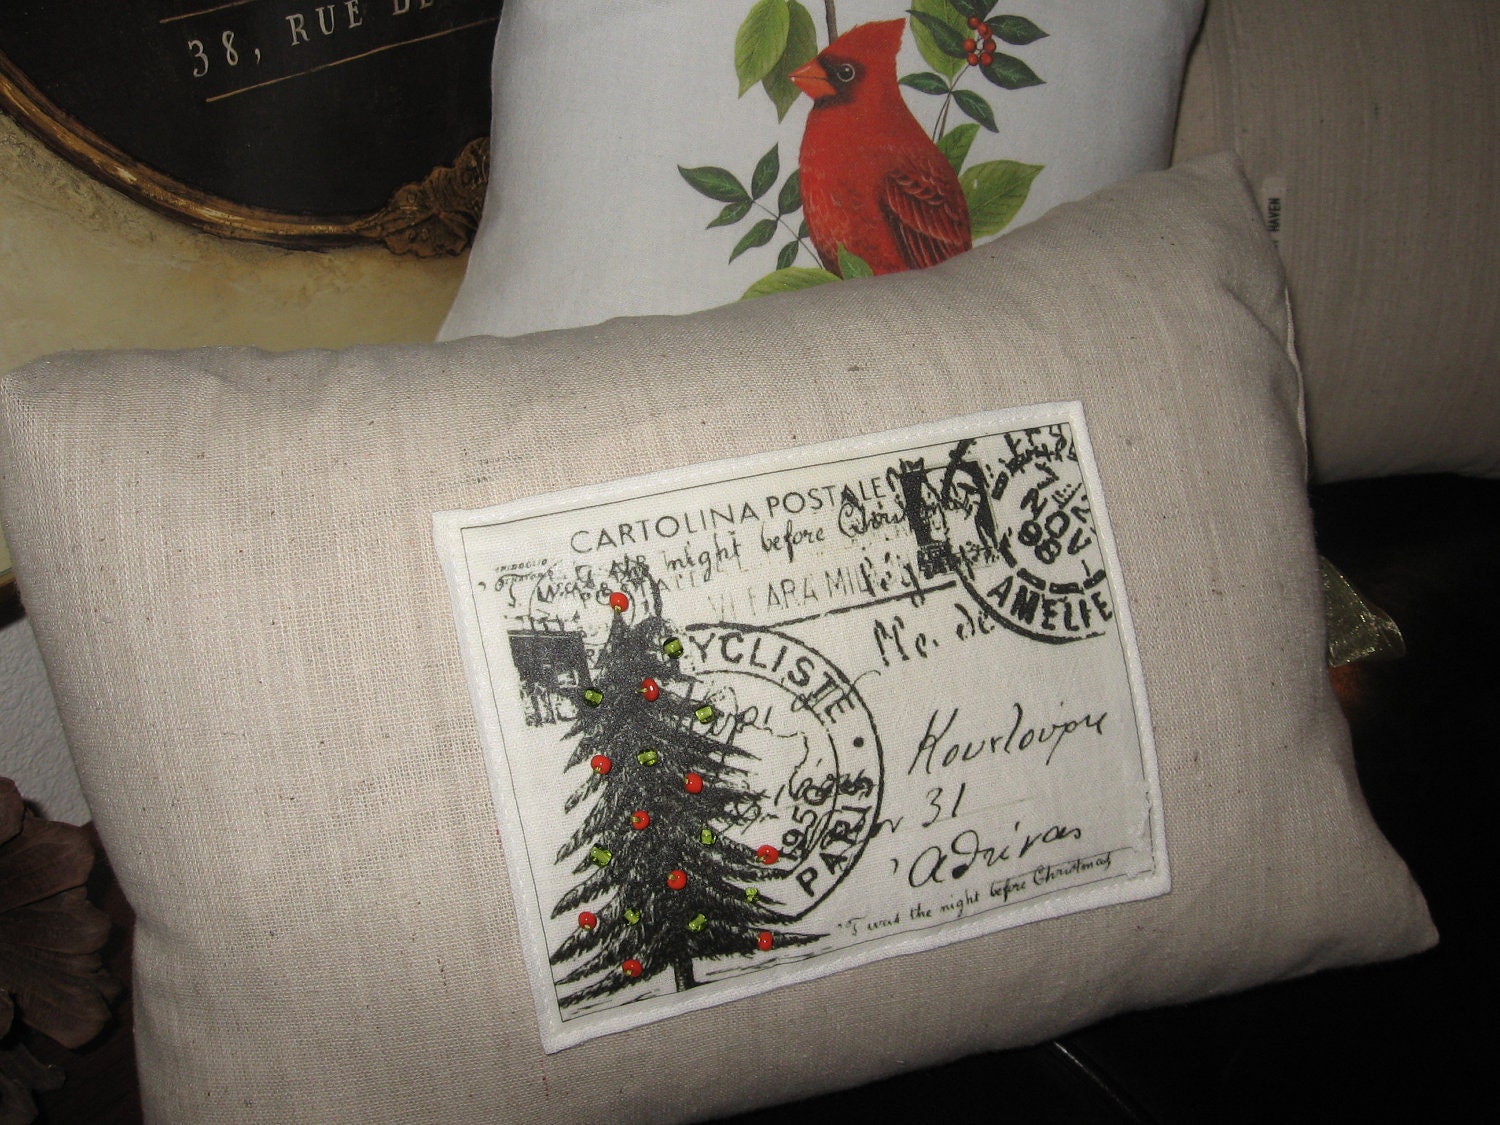 Pillow - Autumn, Fall, Christmas, Winter, Green, Red, Flour Sack, Burlap, Accent, Decorator, Vintage, Holiday, Post Card 12 x 16